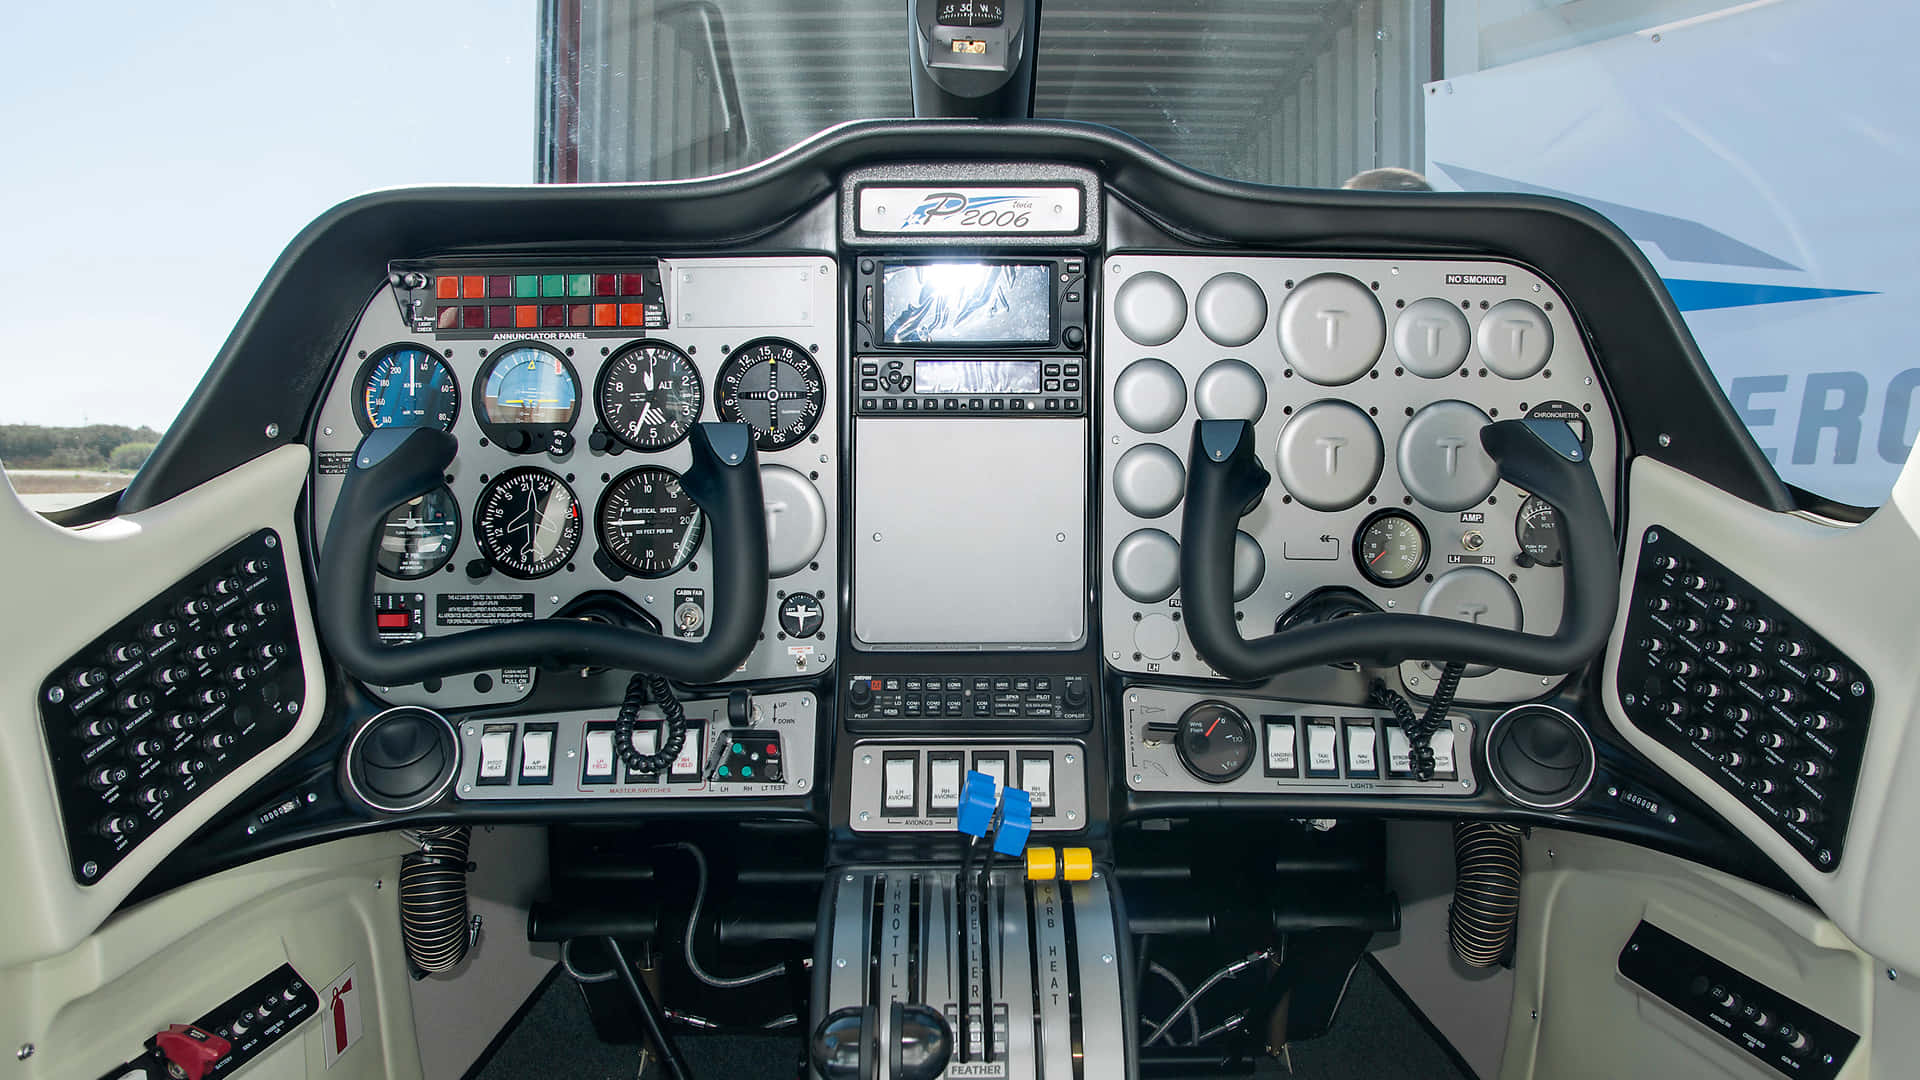 the cockpit of a helicopter with a large screen